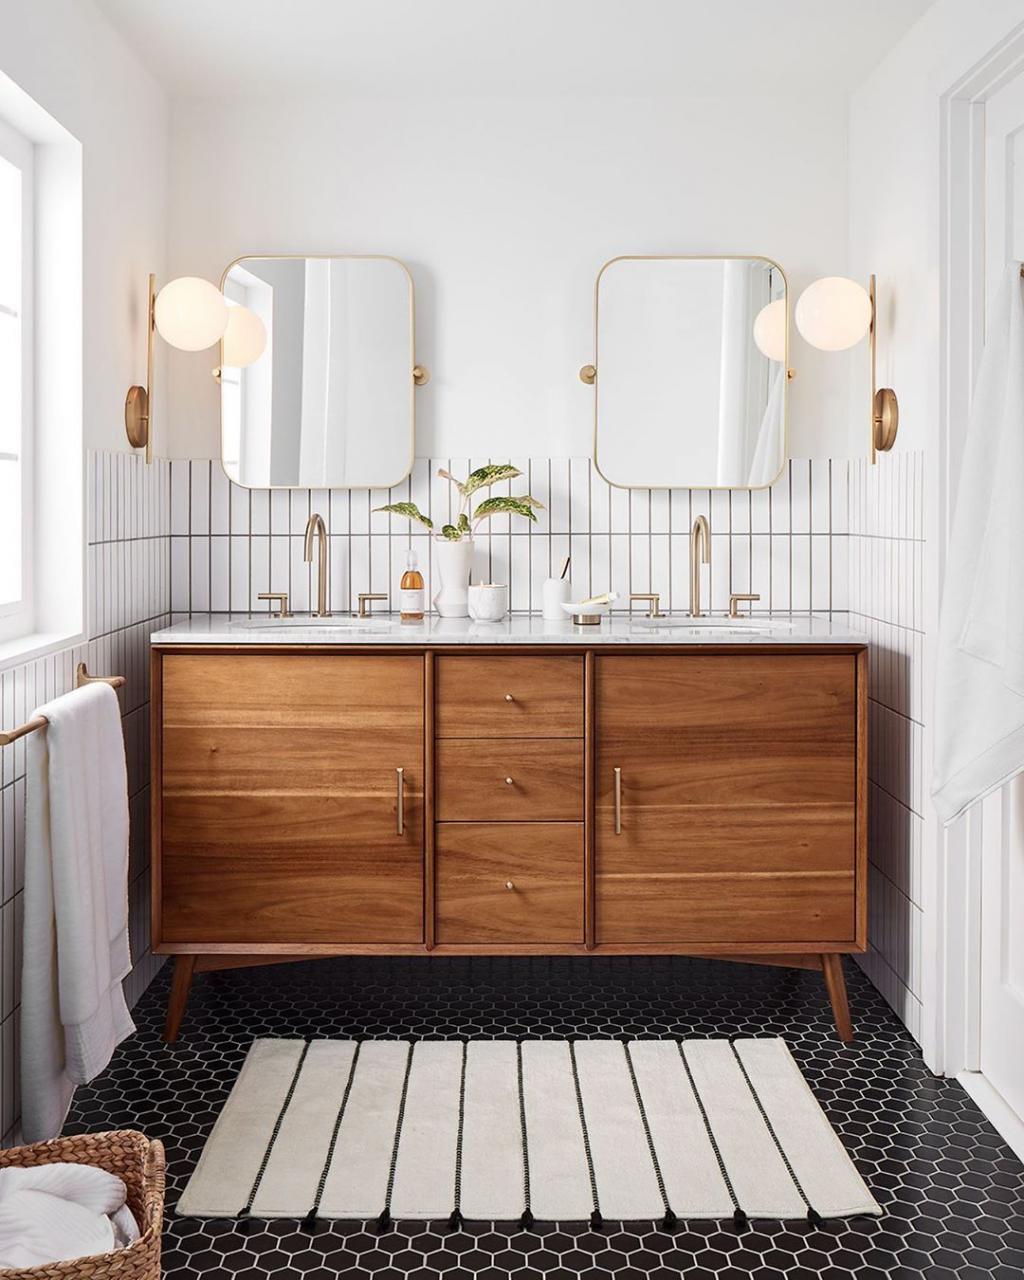 West Elm Furniture + Decor on Instagram “Spa day, every day. Turn